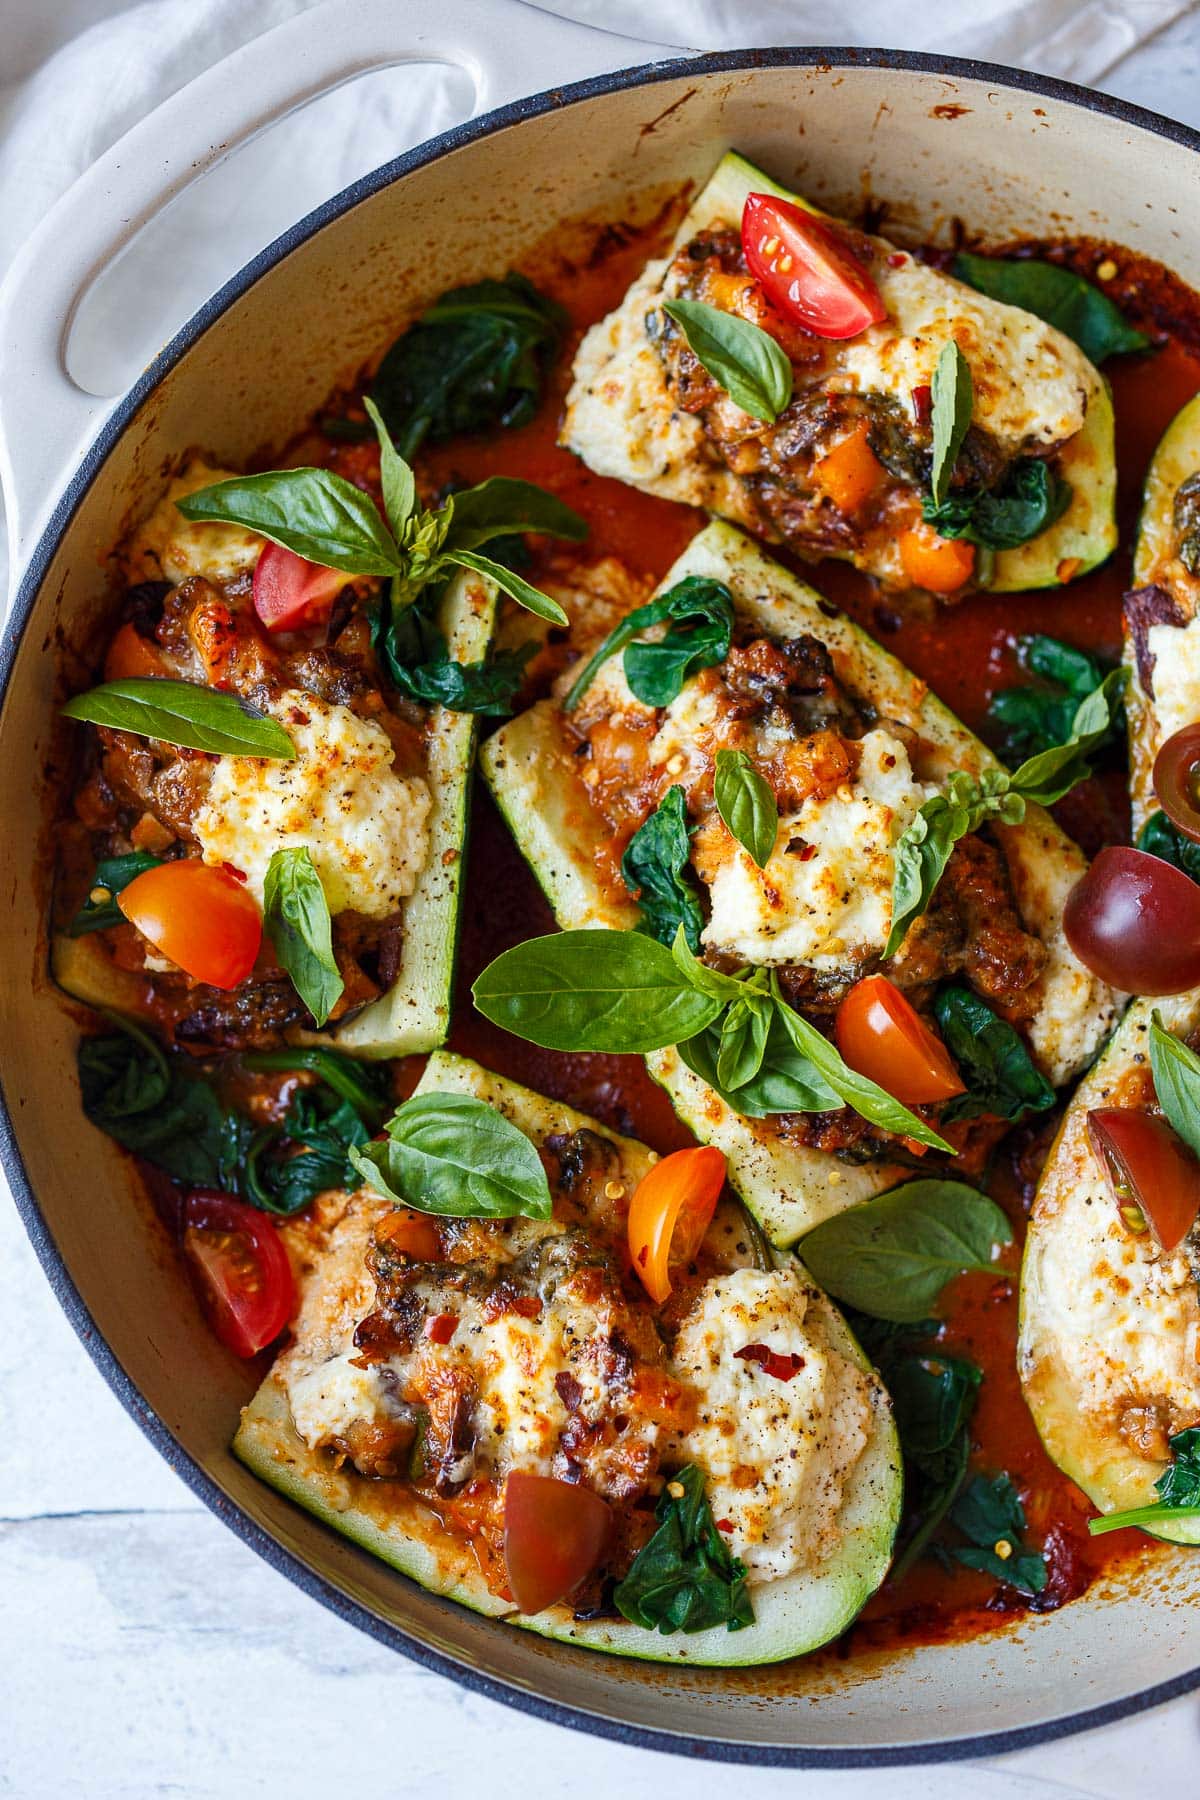 Tender zucchini is stuffed with a savory vegetarian filling of mushrooms, bell pepper, olives and spinach, topped with ricotta & baked in a marinara sauce. 